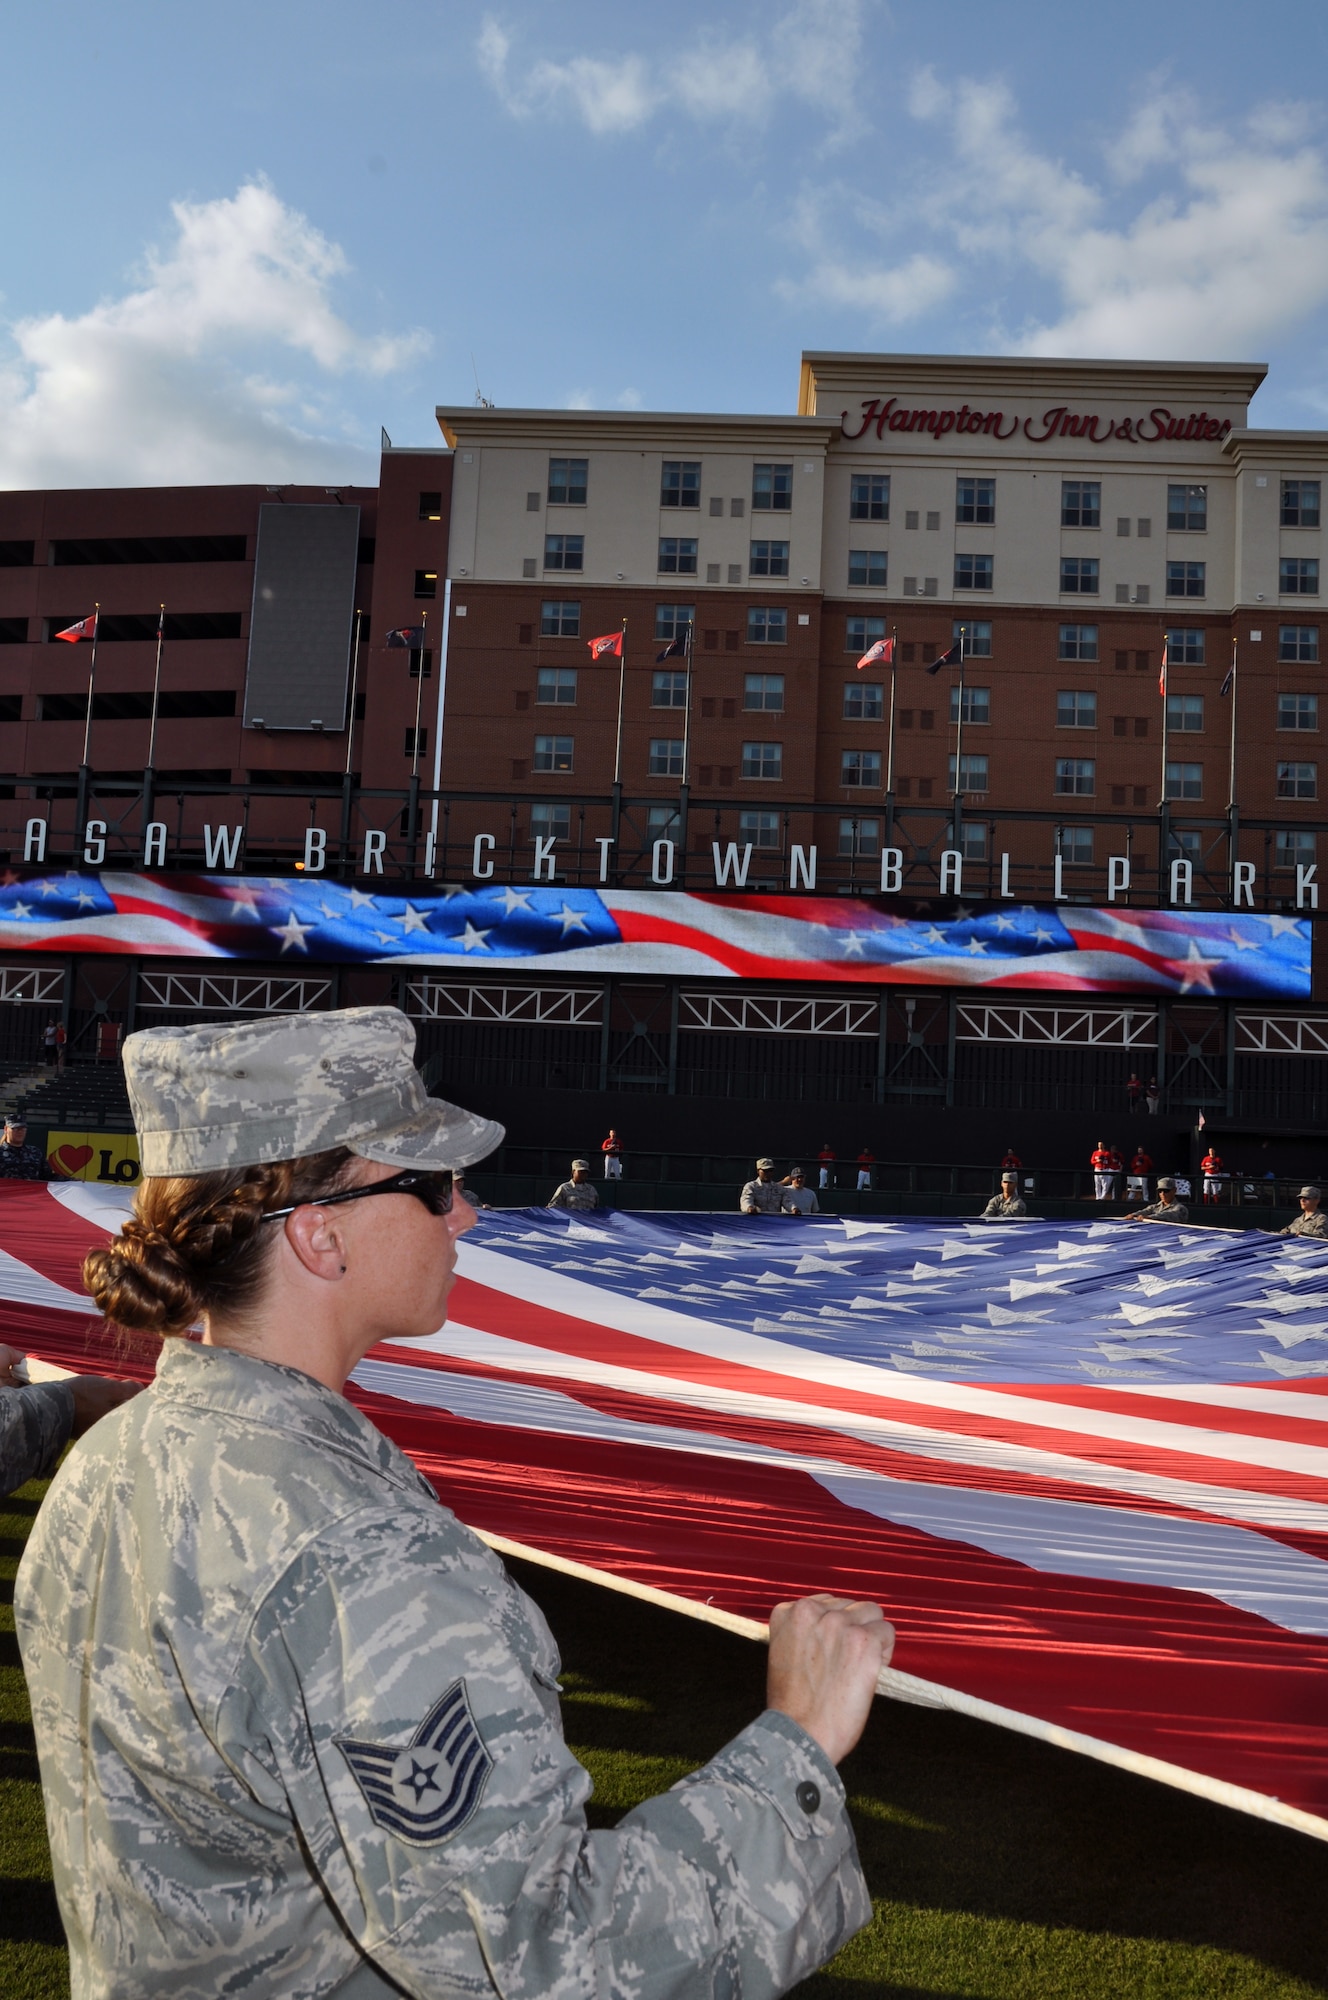 Technical Sgt. Dawn Hardwick, 513th Maintenance Squadron along with 50 other members of Team Tinker, hold a huge U.S. flag during the national anthem at the opening of the Oklahoma City RedHawks military appreciation game on July 27.  Sergeant Hardwick was also recognized during the game because she recently returned from a deployment to South West Asia. The Oklahoma City RedHawks minor league baseball origination held its second hometown heroes celebration of the season to recognize local military members and their families. Members of the 72nd Air Base Wing, 507th Air Refueling Wing, 552nd Air Control Wing, U.S. Navy Strategic Communications Wing One and the Air Logistics Center all volunteered to represent the military during the military appreciation game which included an oath of enlistment and special recognition of recently deployed Airmen. (U.S. Air Force Photo/Maj. Jon Quinlan)